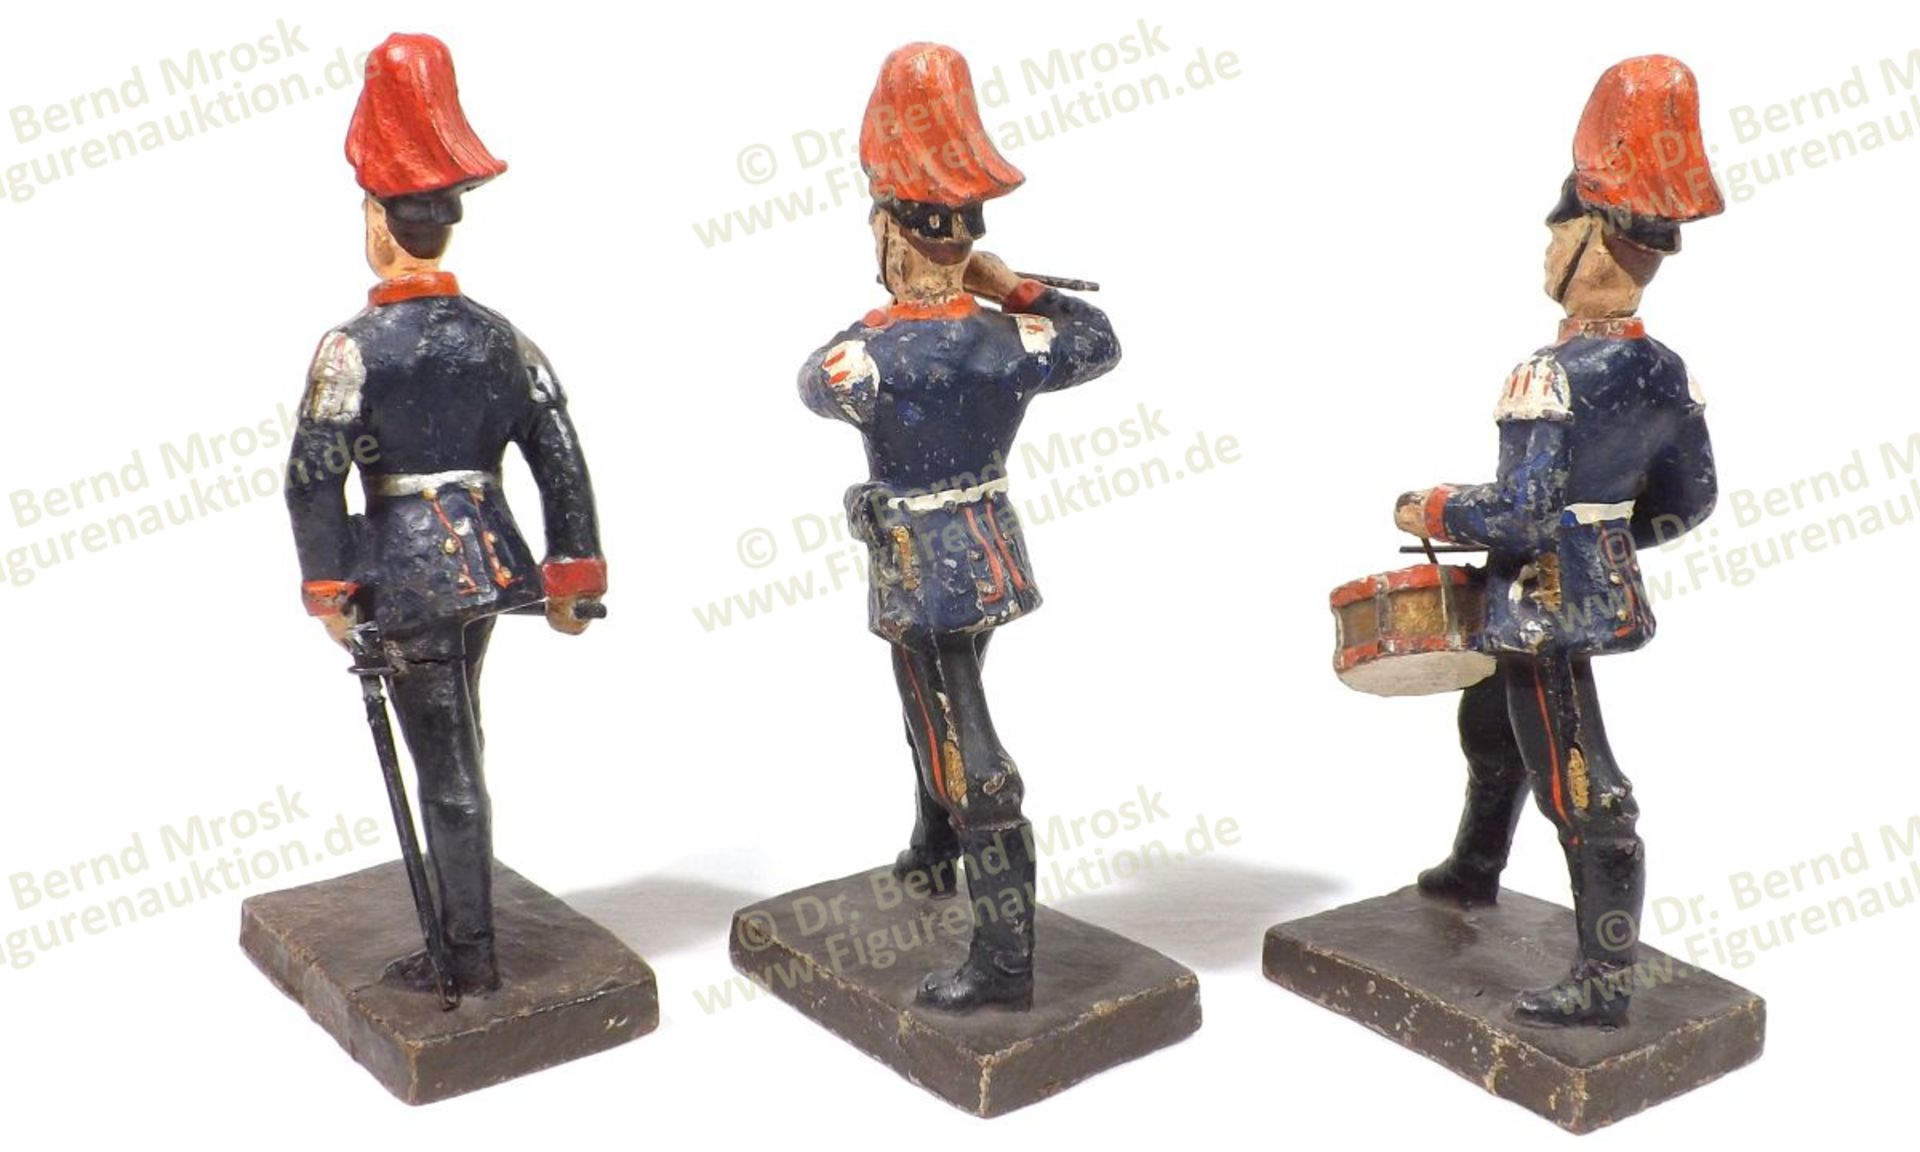 German military, Lineol, composition figures, 14 cm size, made in Germany probably before 1915, rare - Bild 2 aus 2